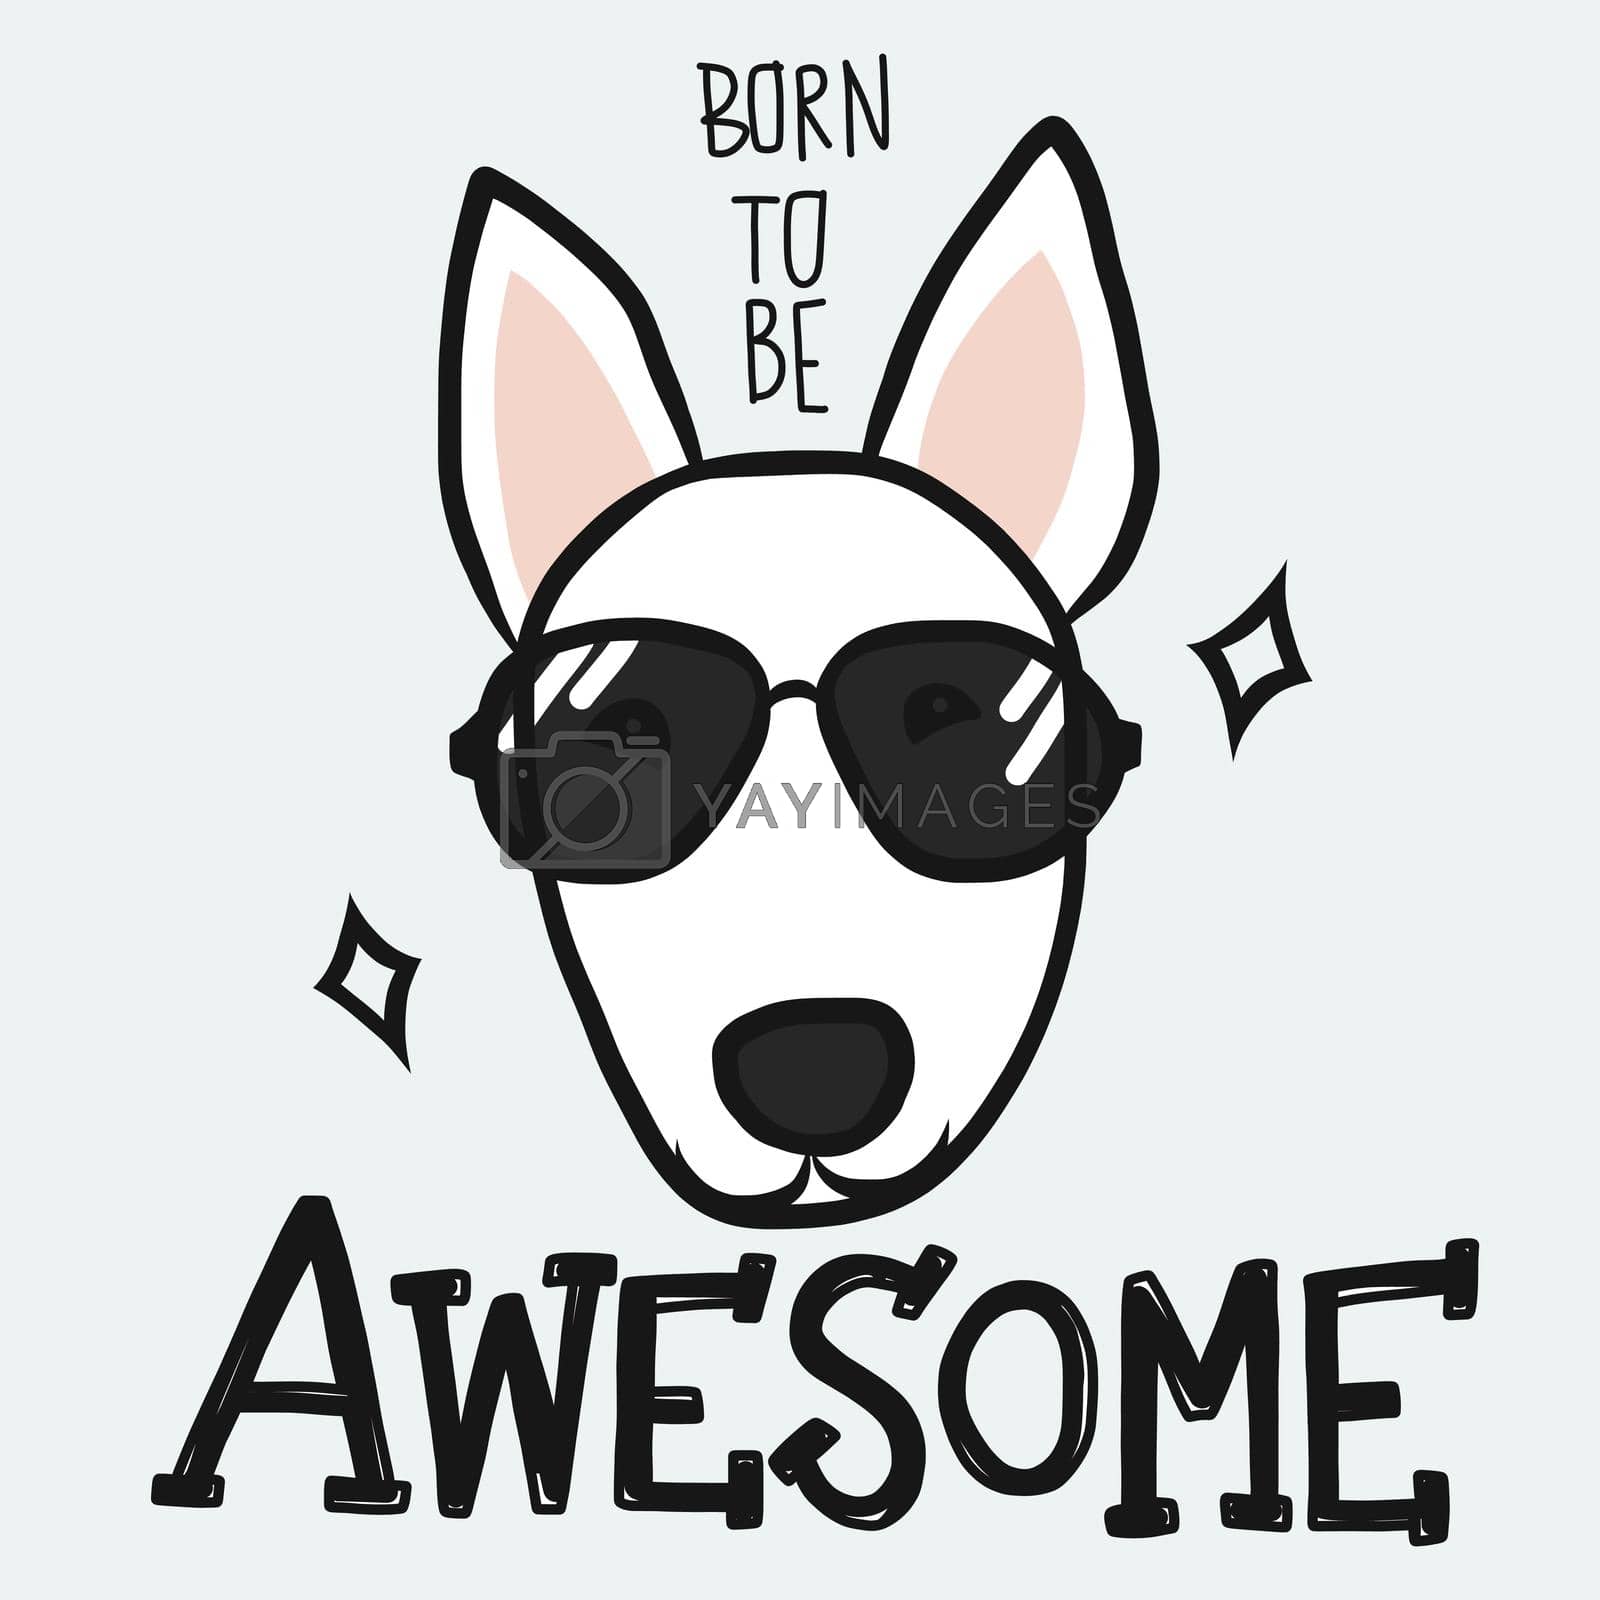 Royalty free image of Bull Terrier born to be awesome cartoon vector illustration by Yoopho